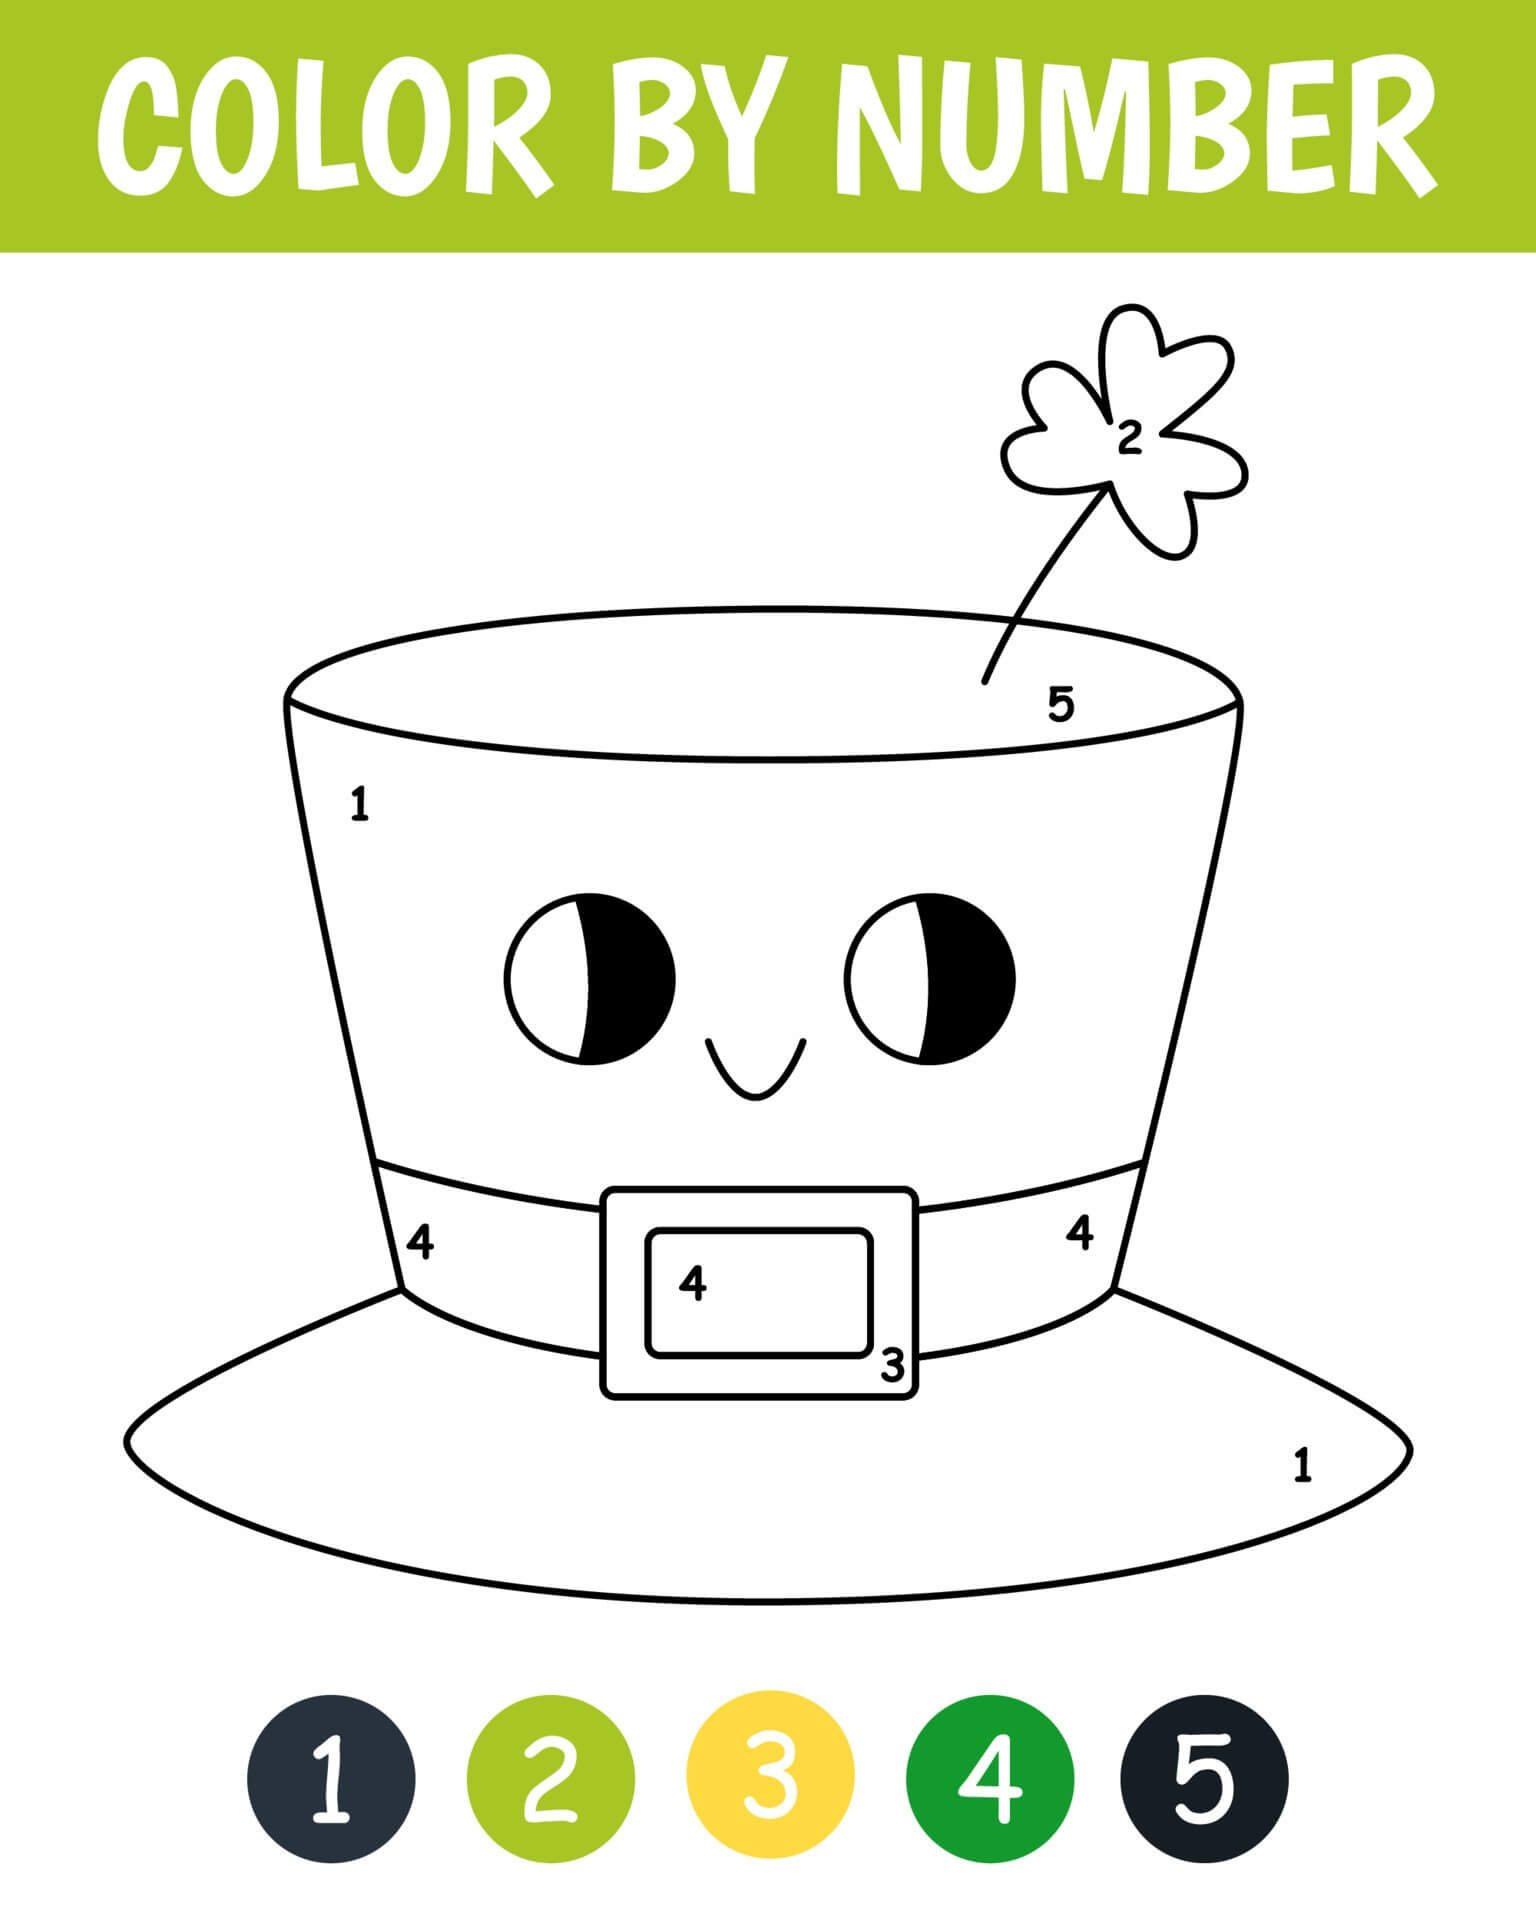 Cute Hat With Clover. St. Patrick's Day Color By Numer